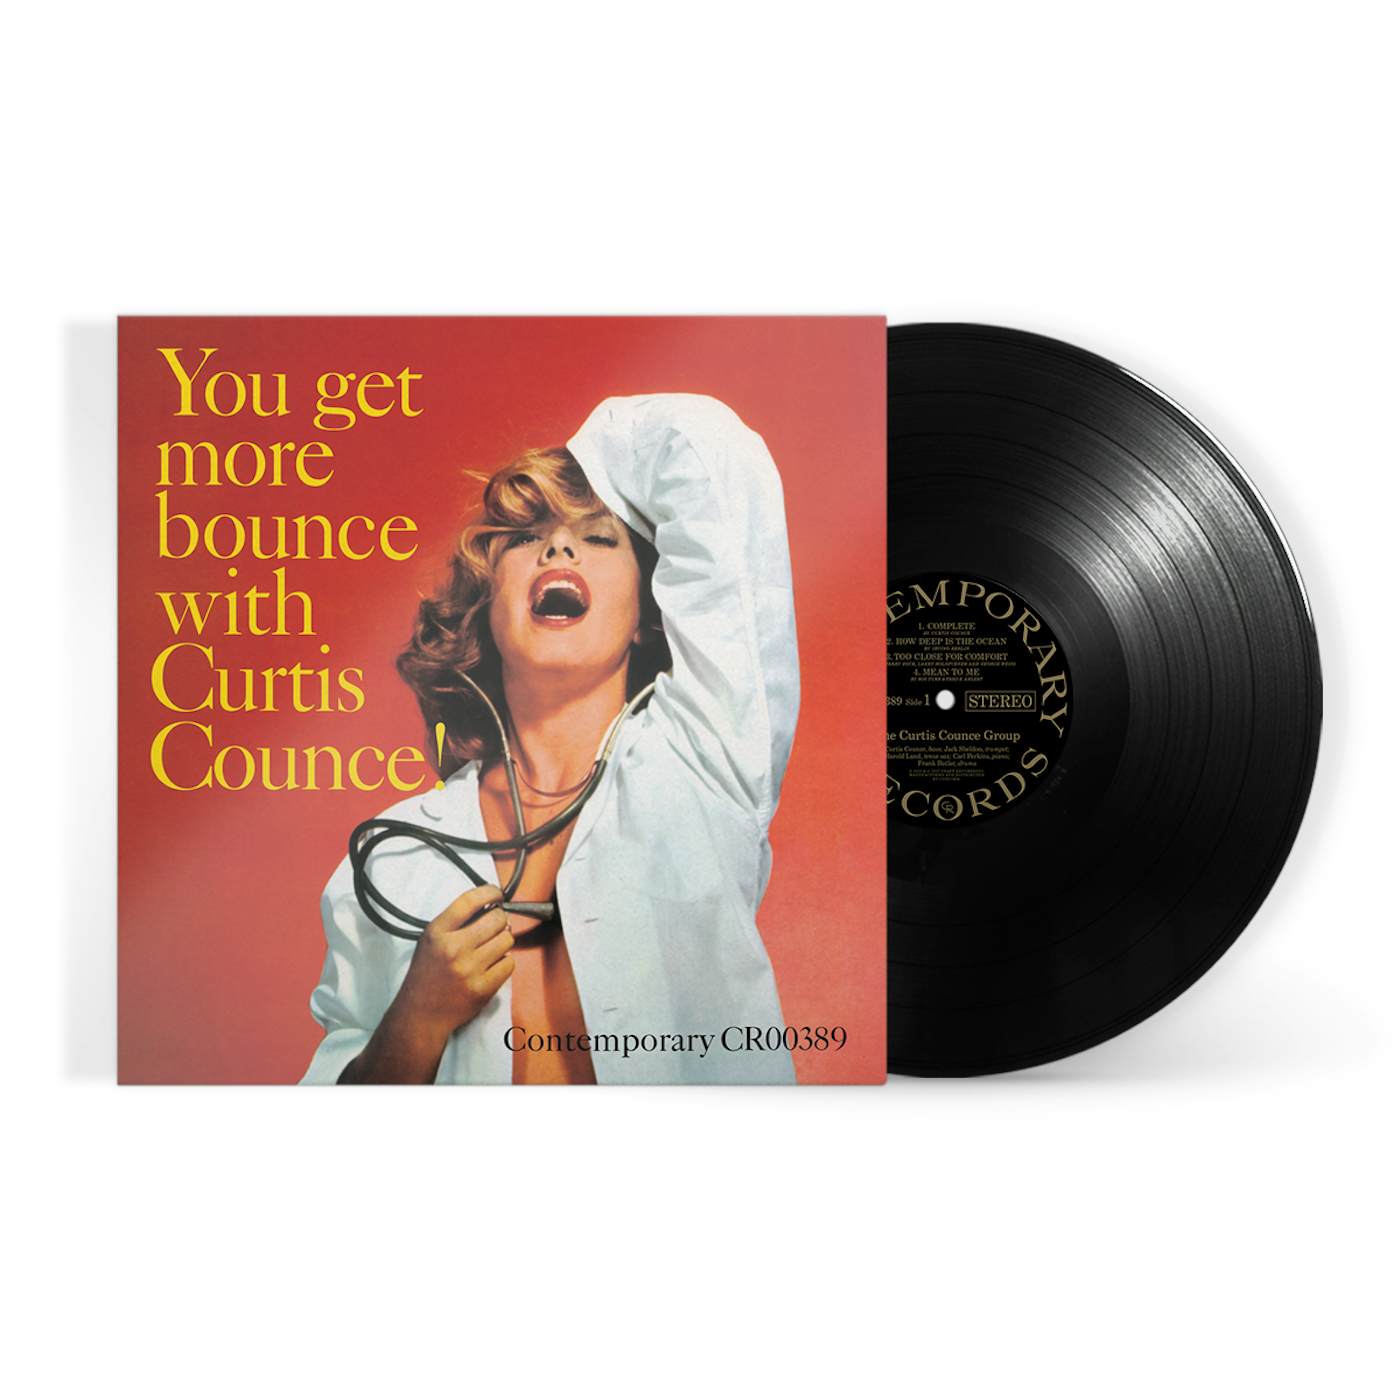 You Get More Bounce With Curtis Counce! - Contemporary Records Acoustic Sounds